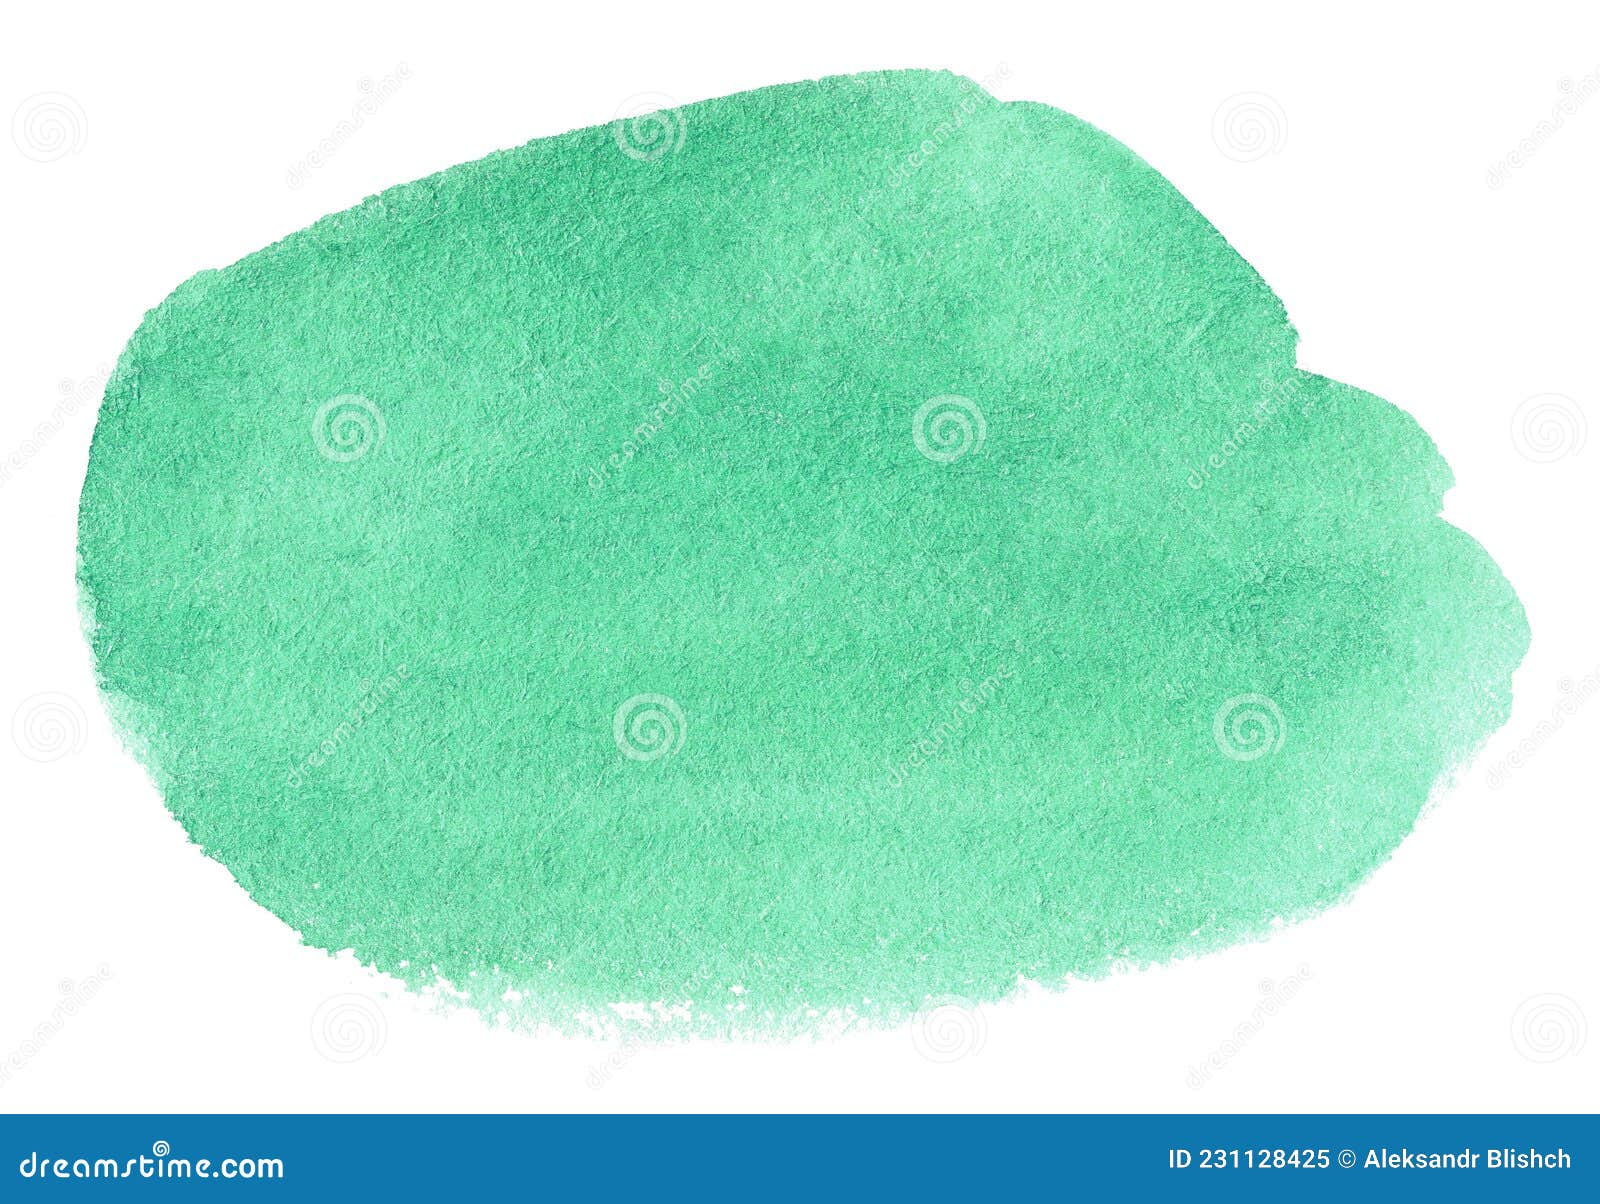 Mint Green Watercolor Clip Art Hand Paint On White Background Artistic